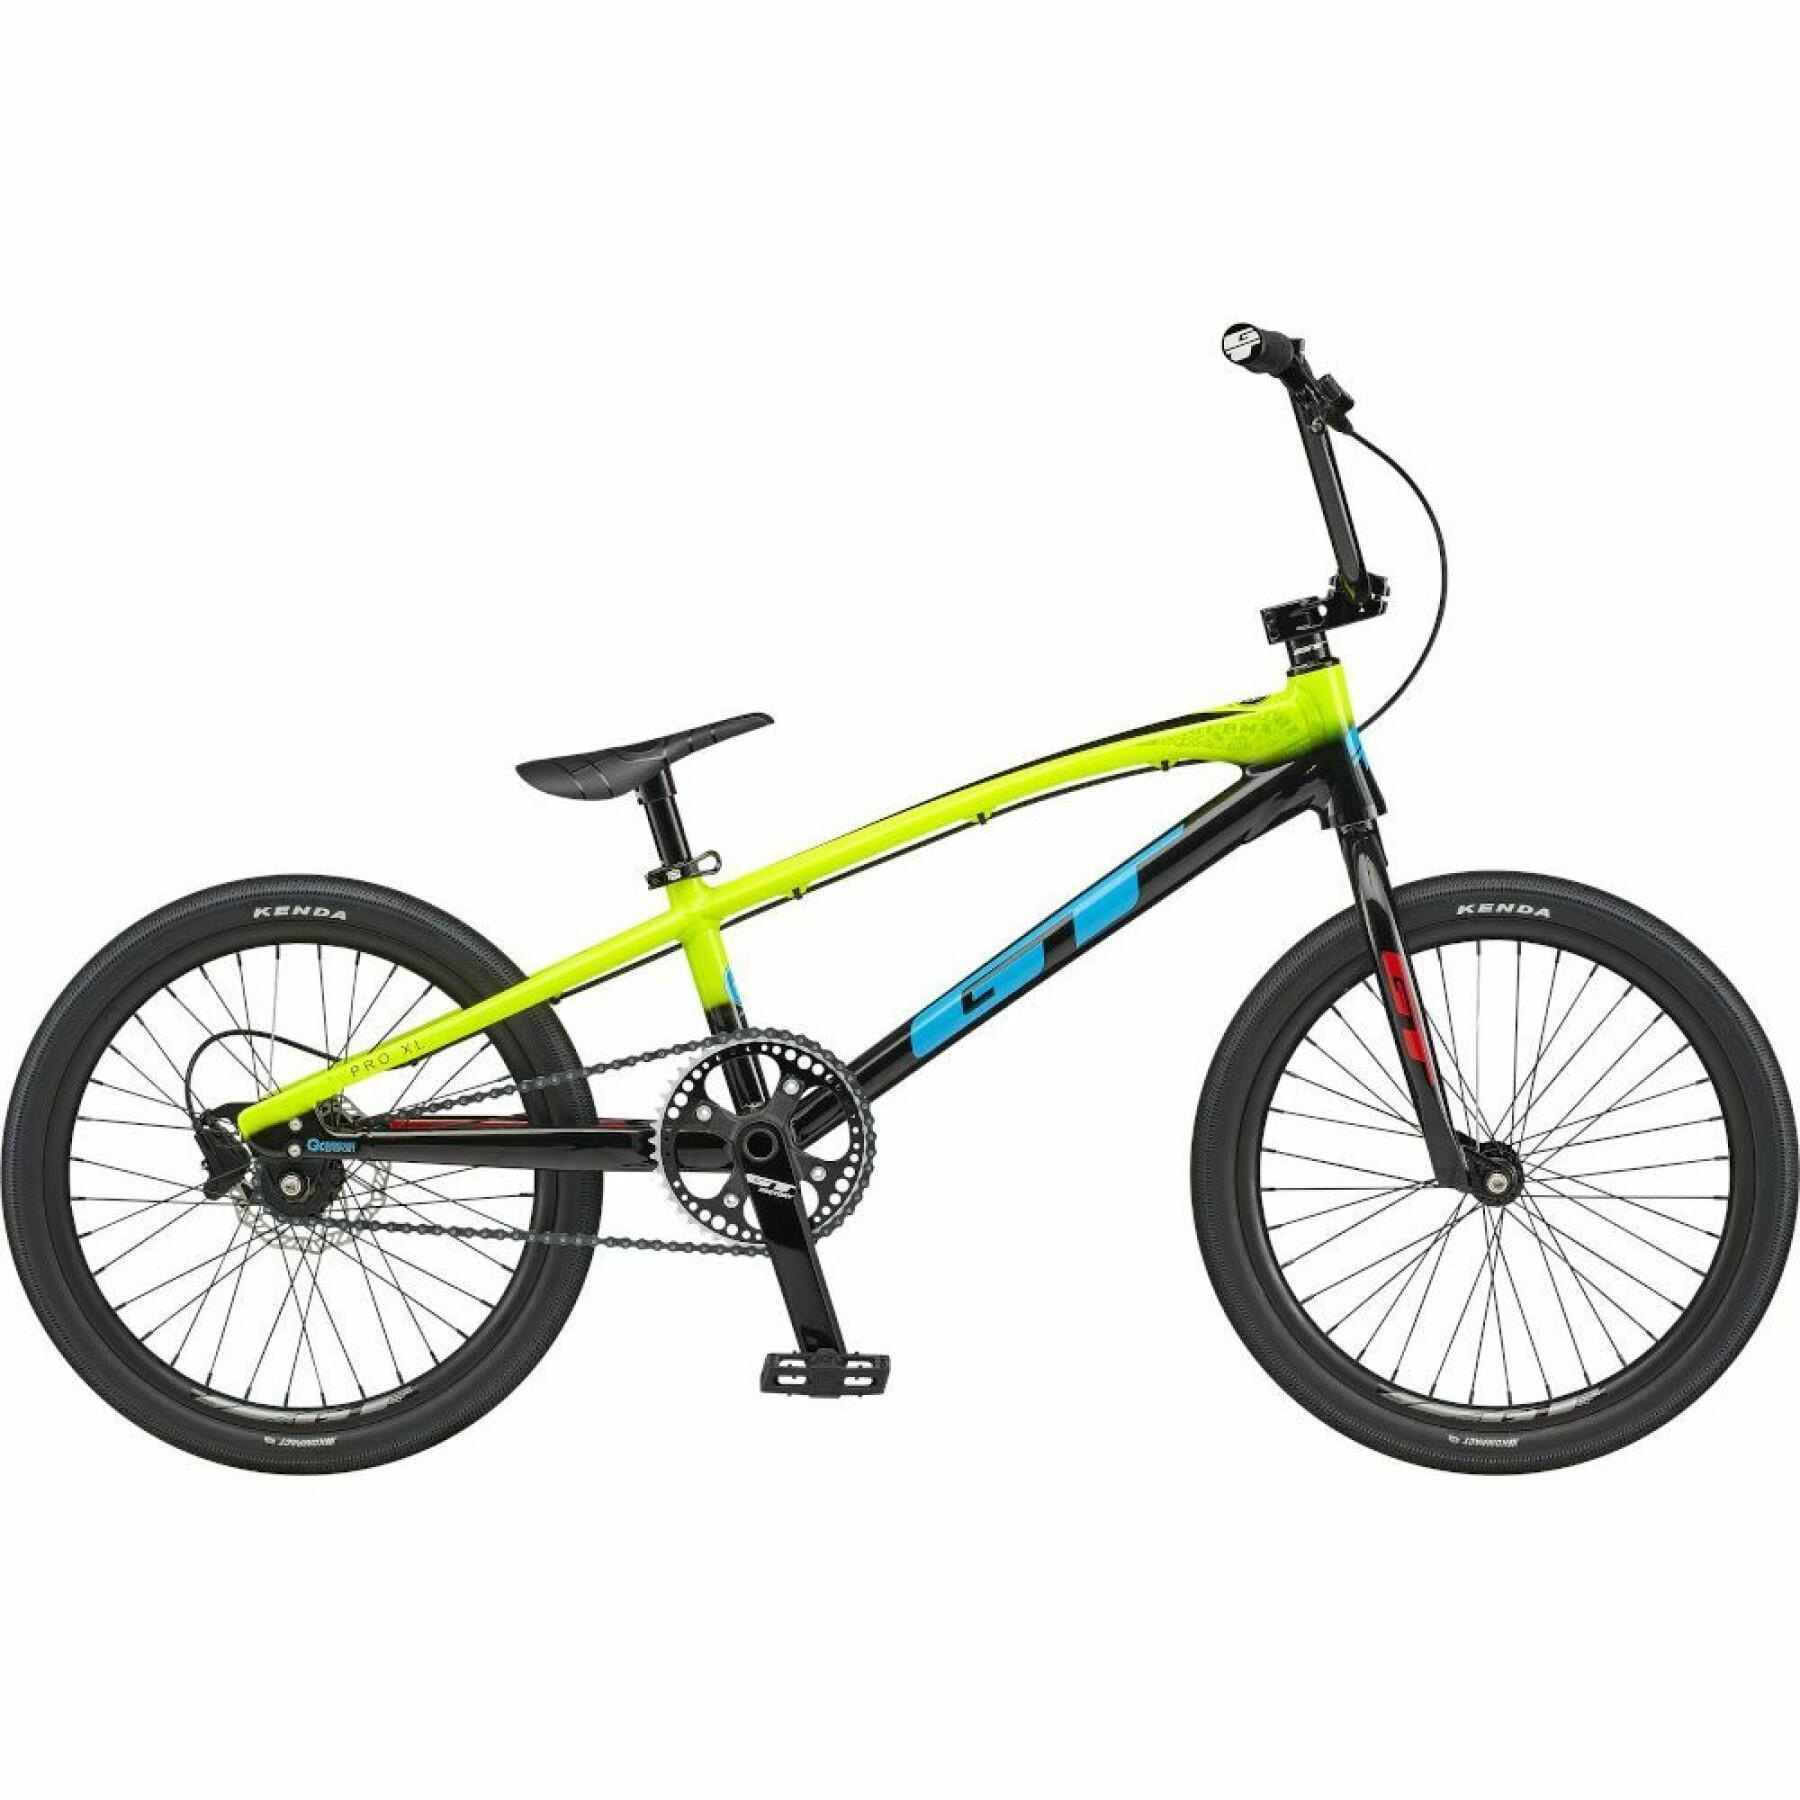 Fiets GT Bicycles gt speed series 2021 Pro XL